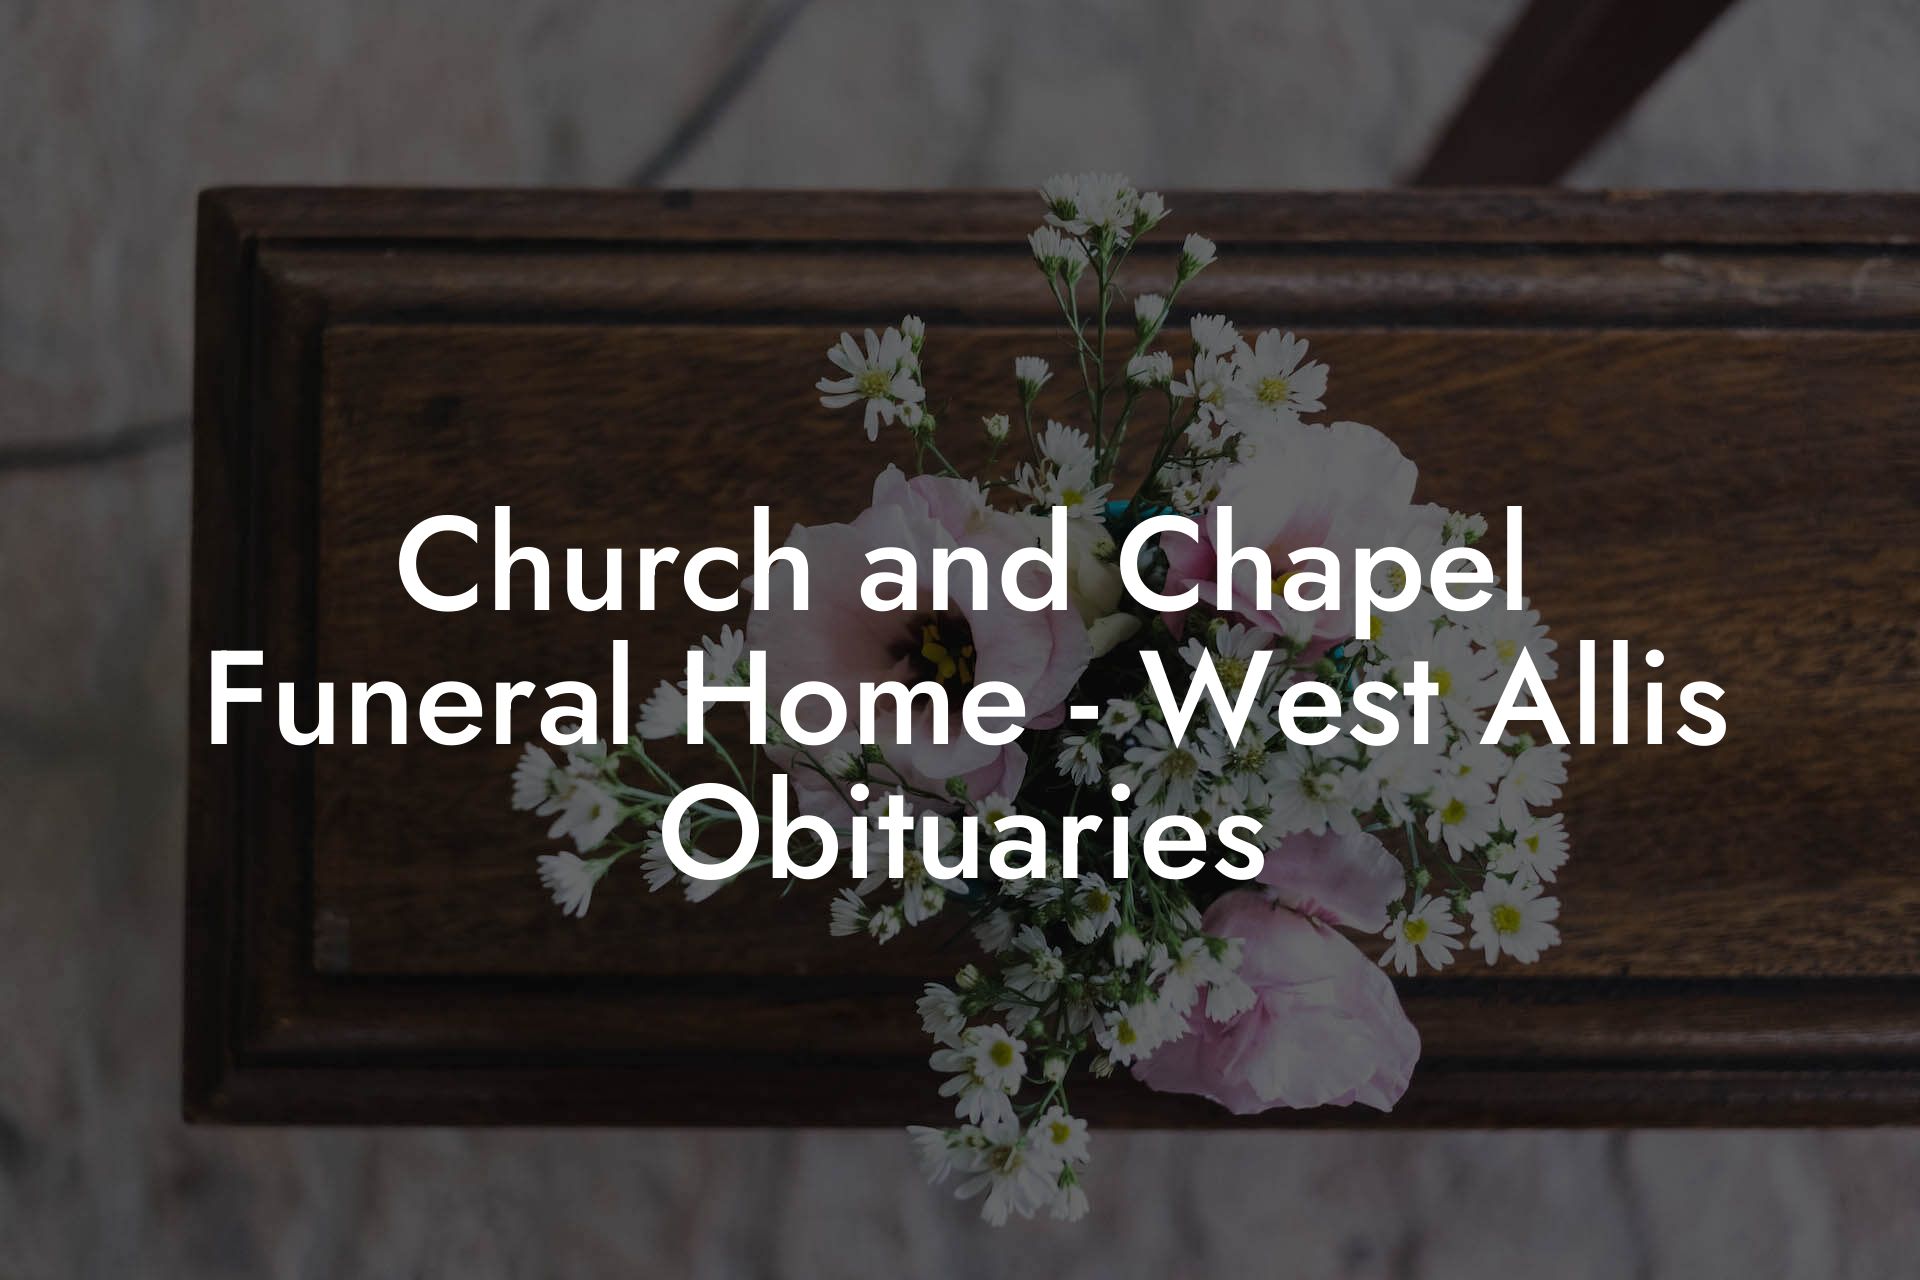 Church and Chapel Funeral Home - West Allis Obituaries